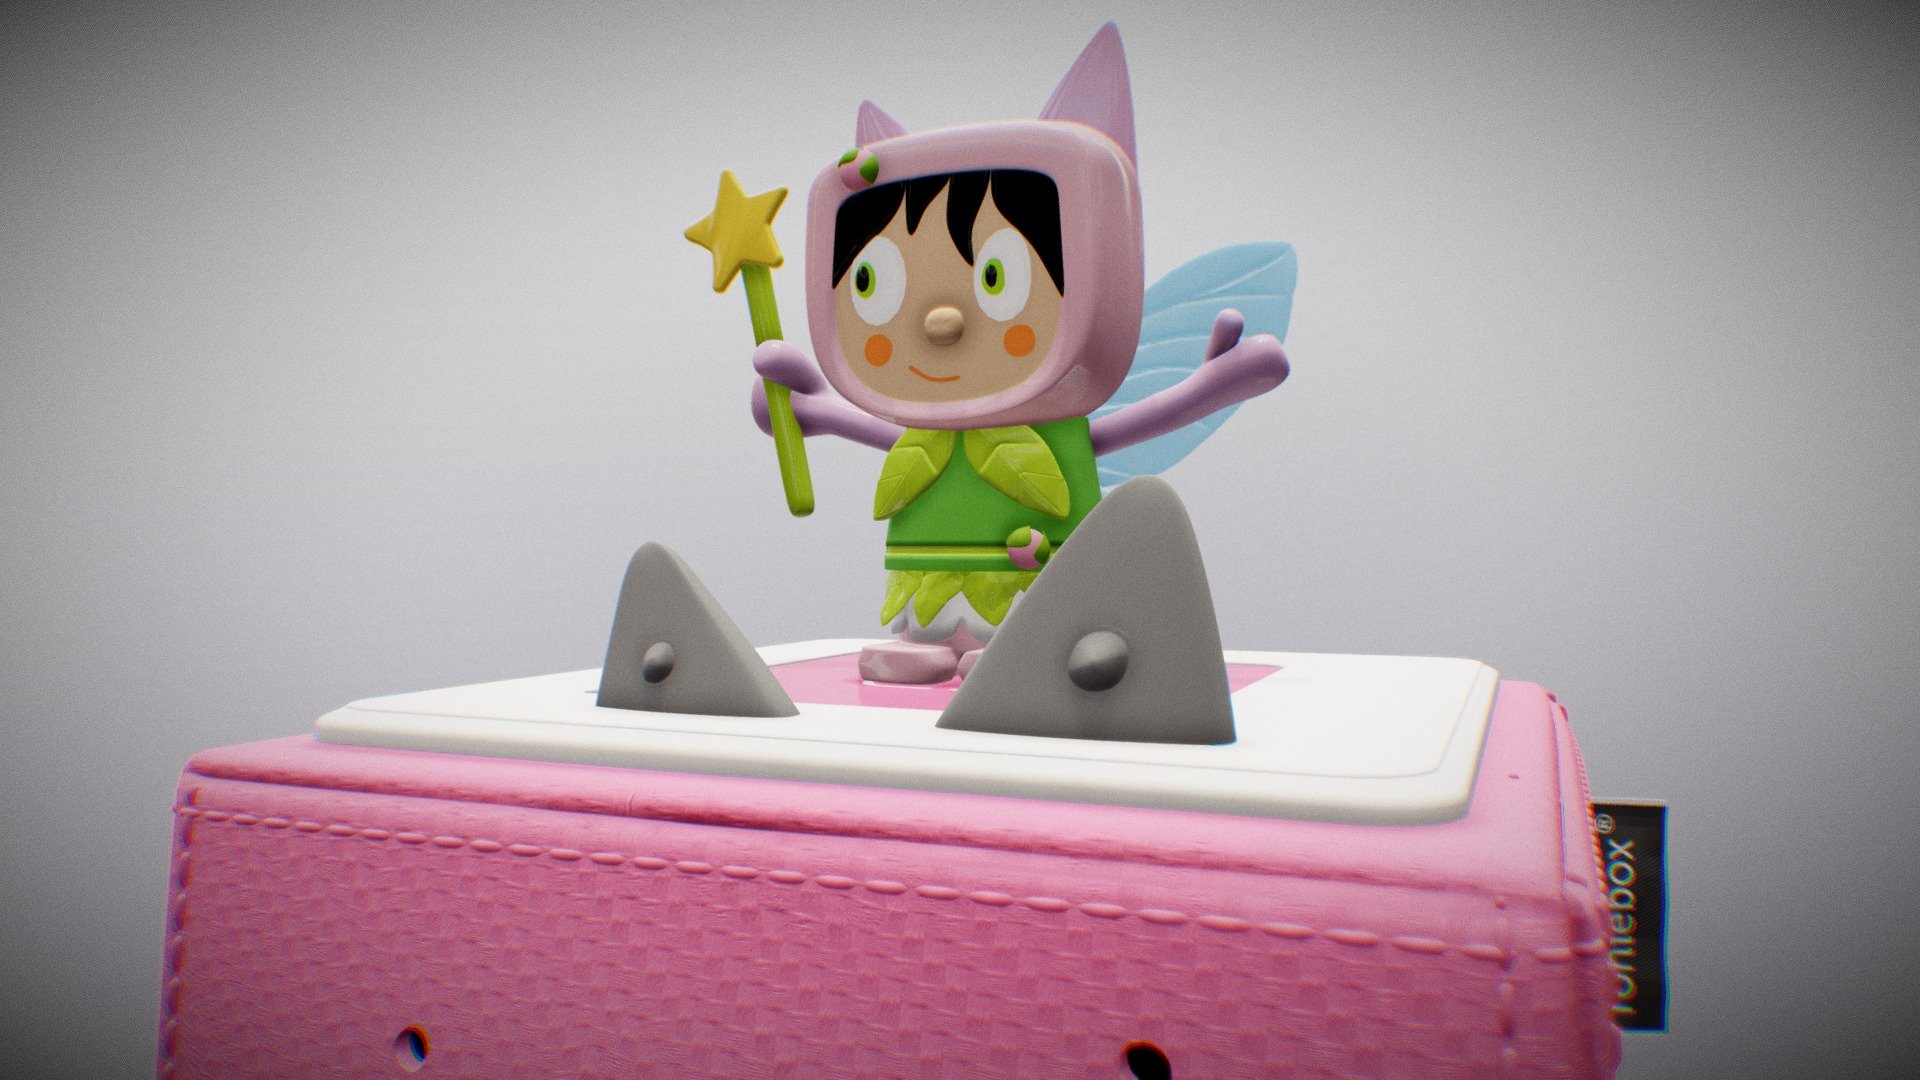 ToniesBox is a Smart Interactive educational device for children - Tonies ANGEL Animated - 3D model by whywalk 3d model